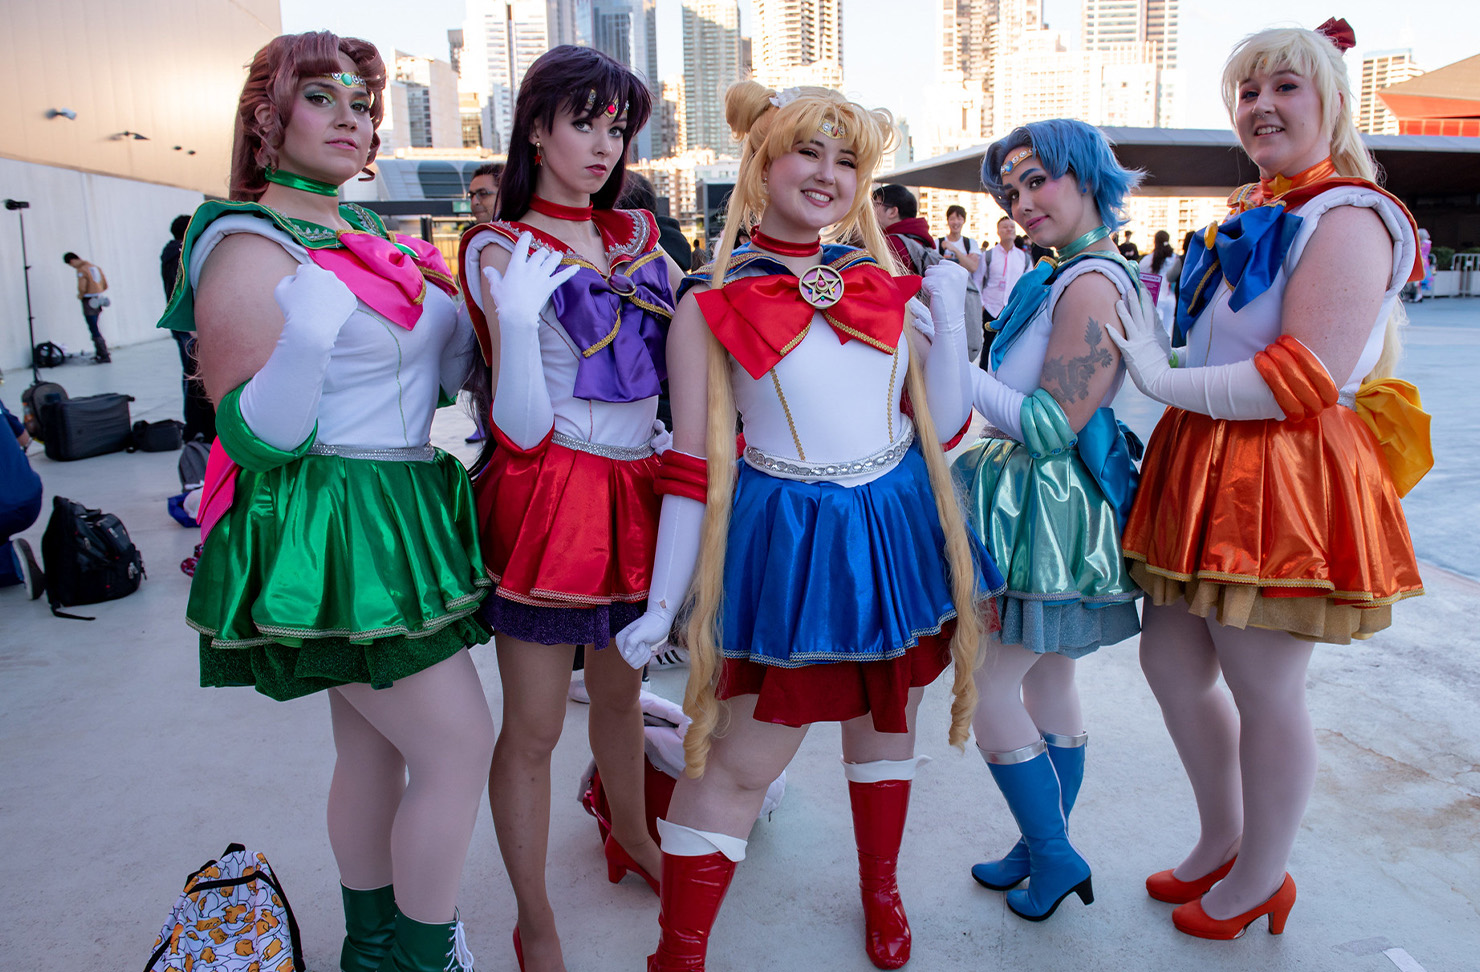 Group of cosplayers posing